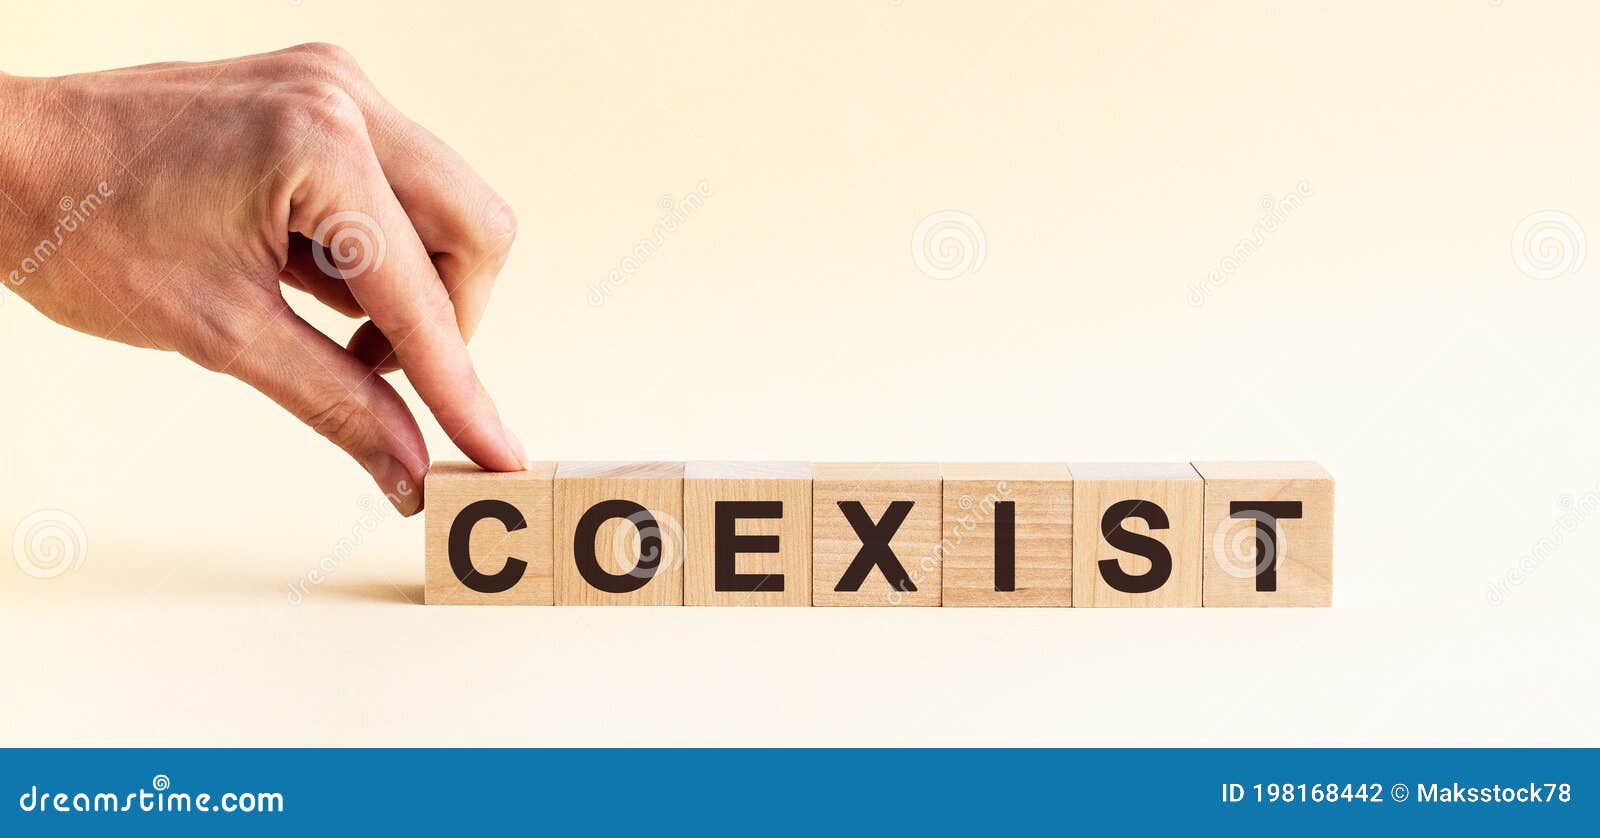 woman made word coexist with wood blocks